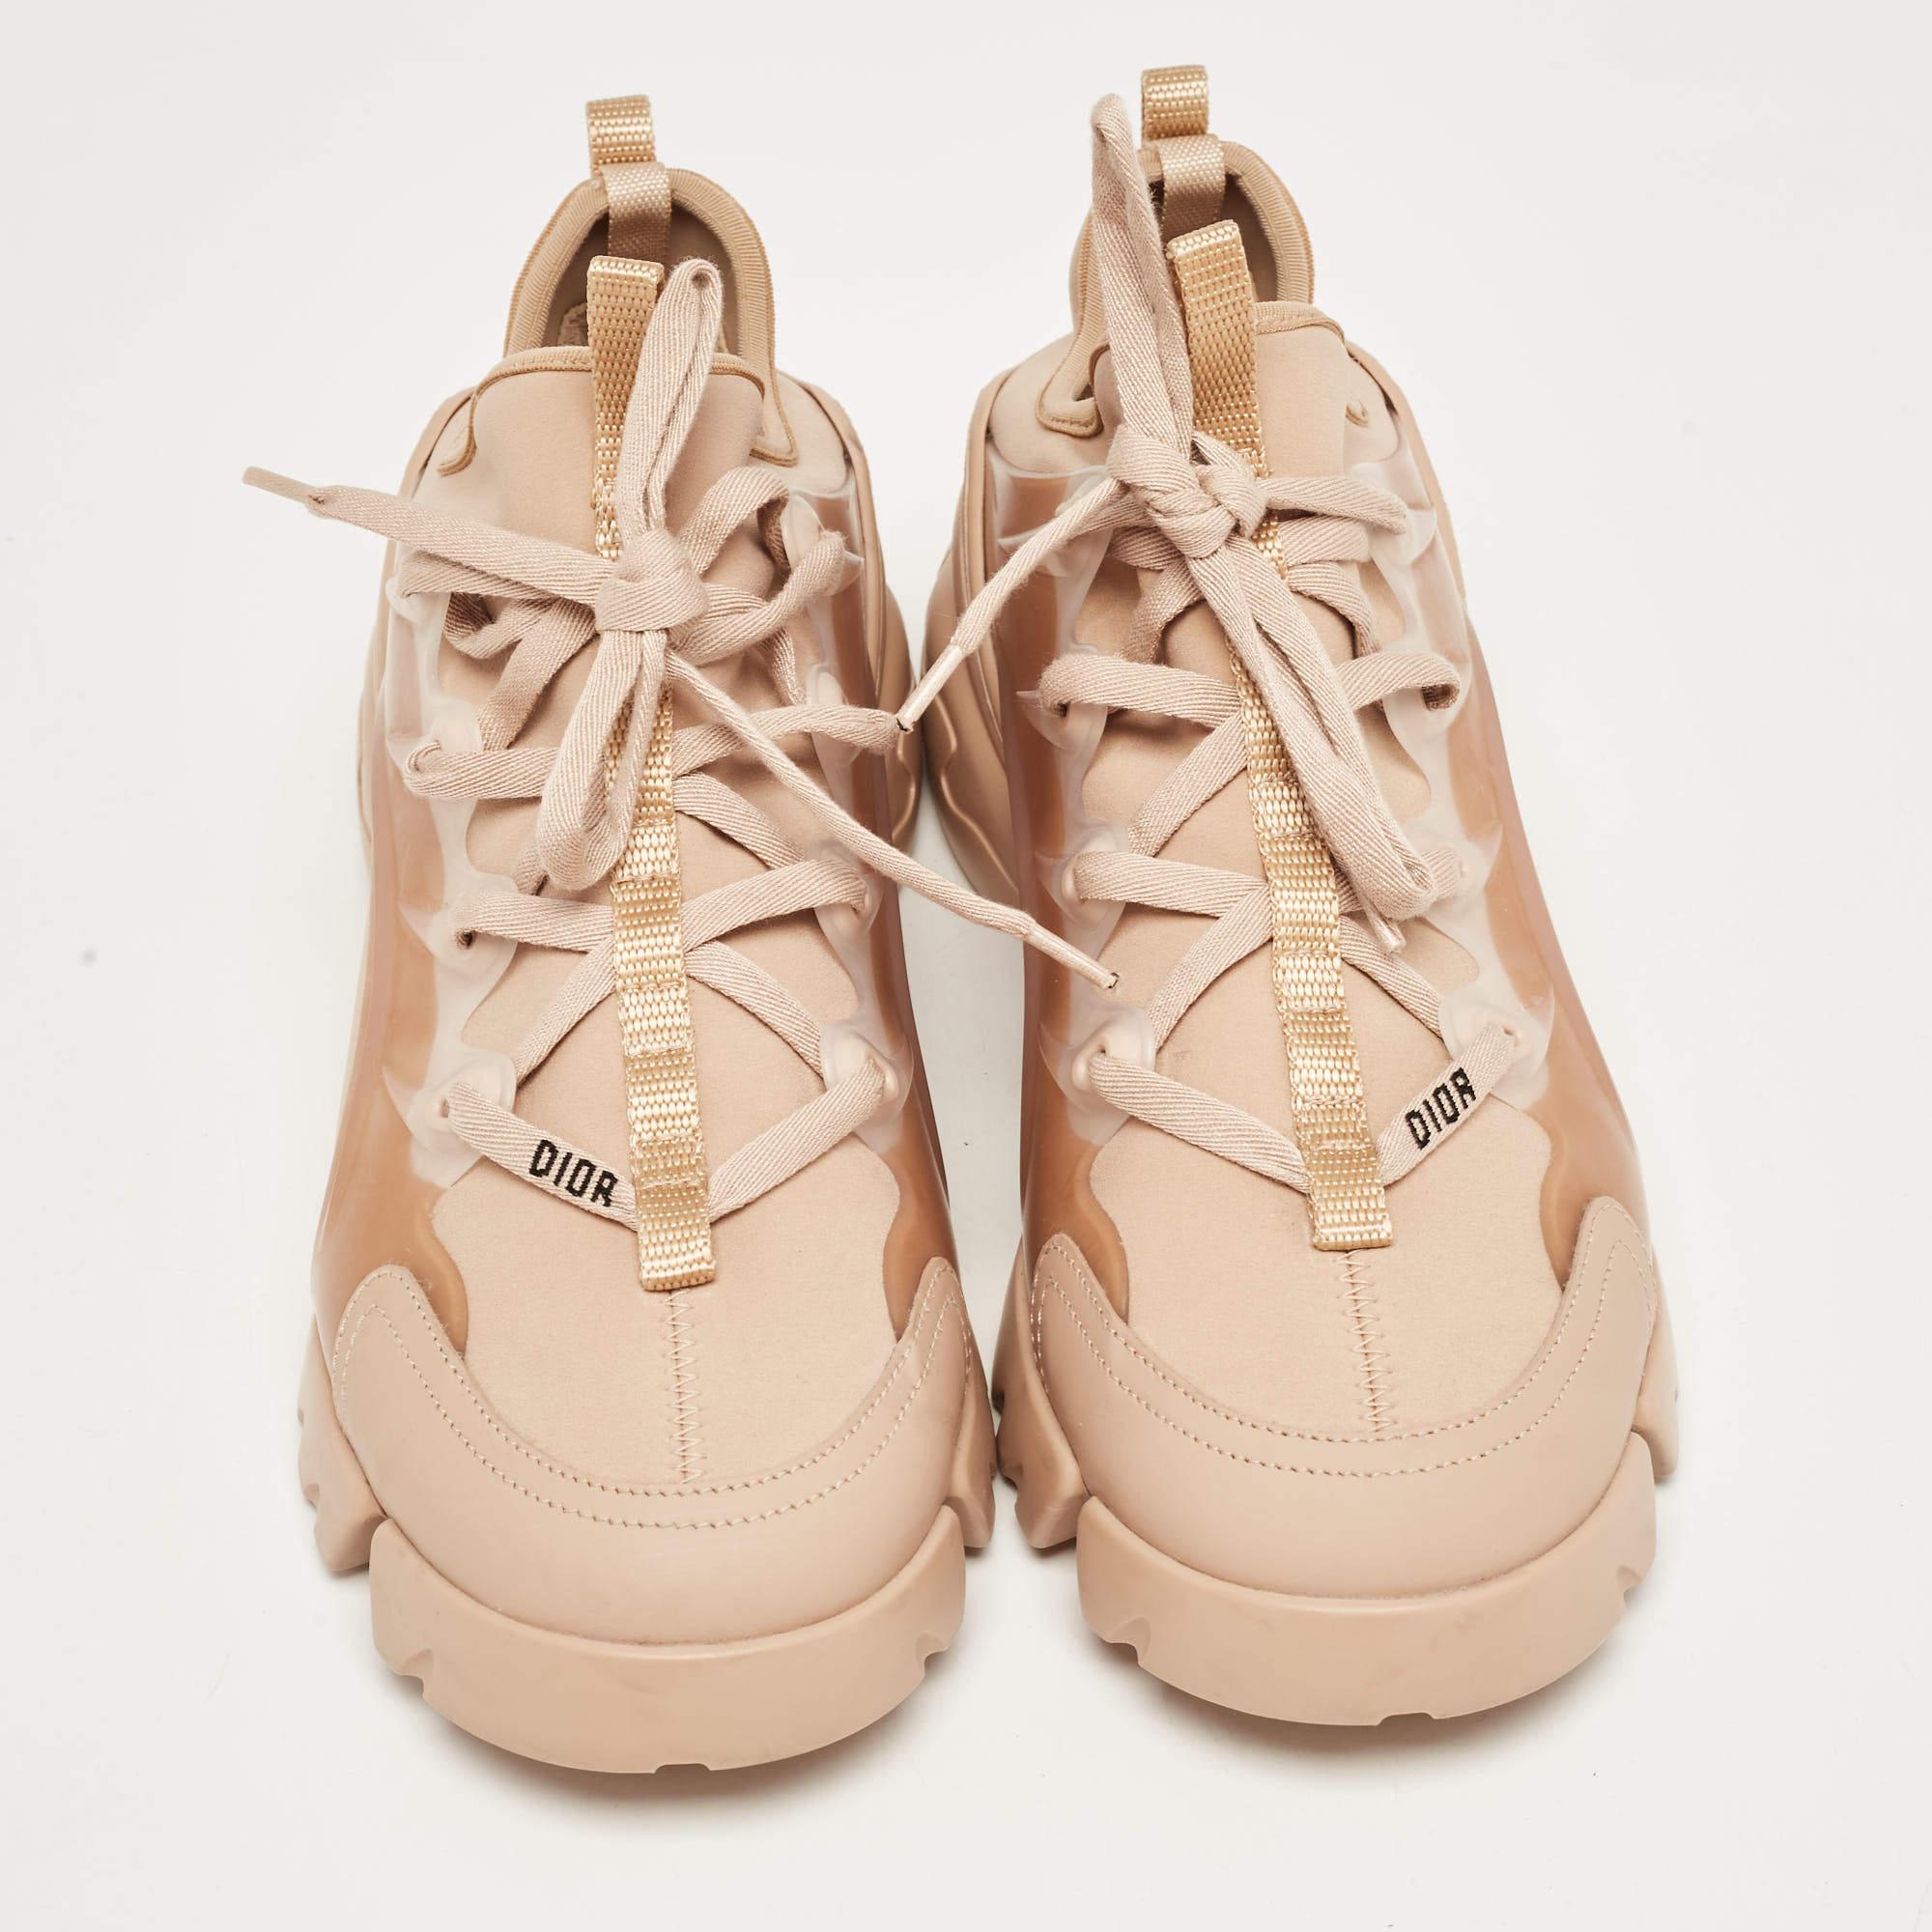 Dior's D-Connect sneaker is presented in fabric and leather, with brand details, sculpted soles, and laces for easy securing. The shoes fit well and look great.

Includes
Original Dustbag, Original Box, Extra Laces, Authenticity Card